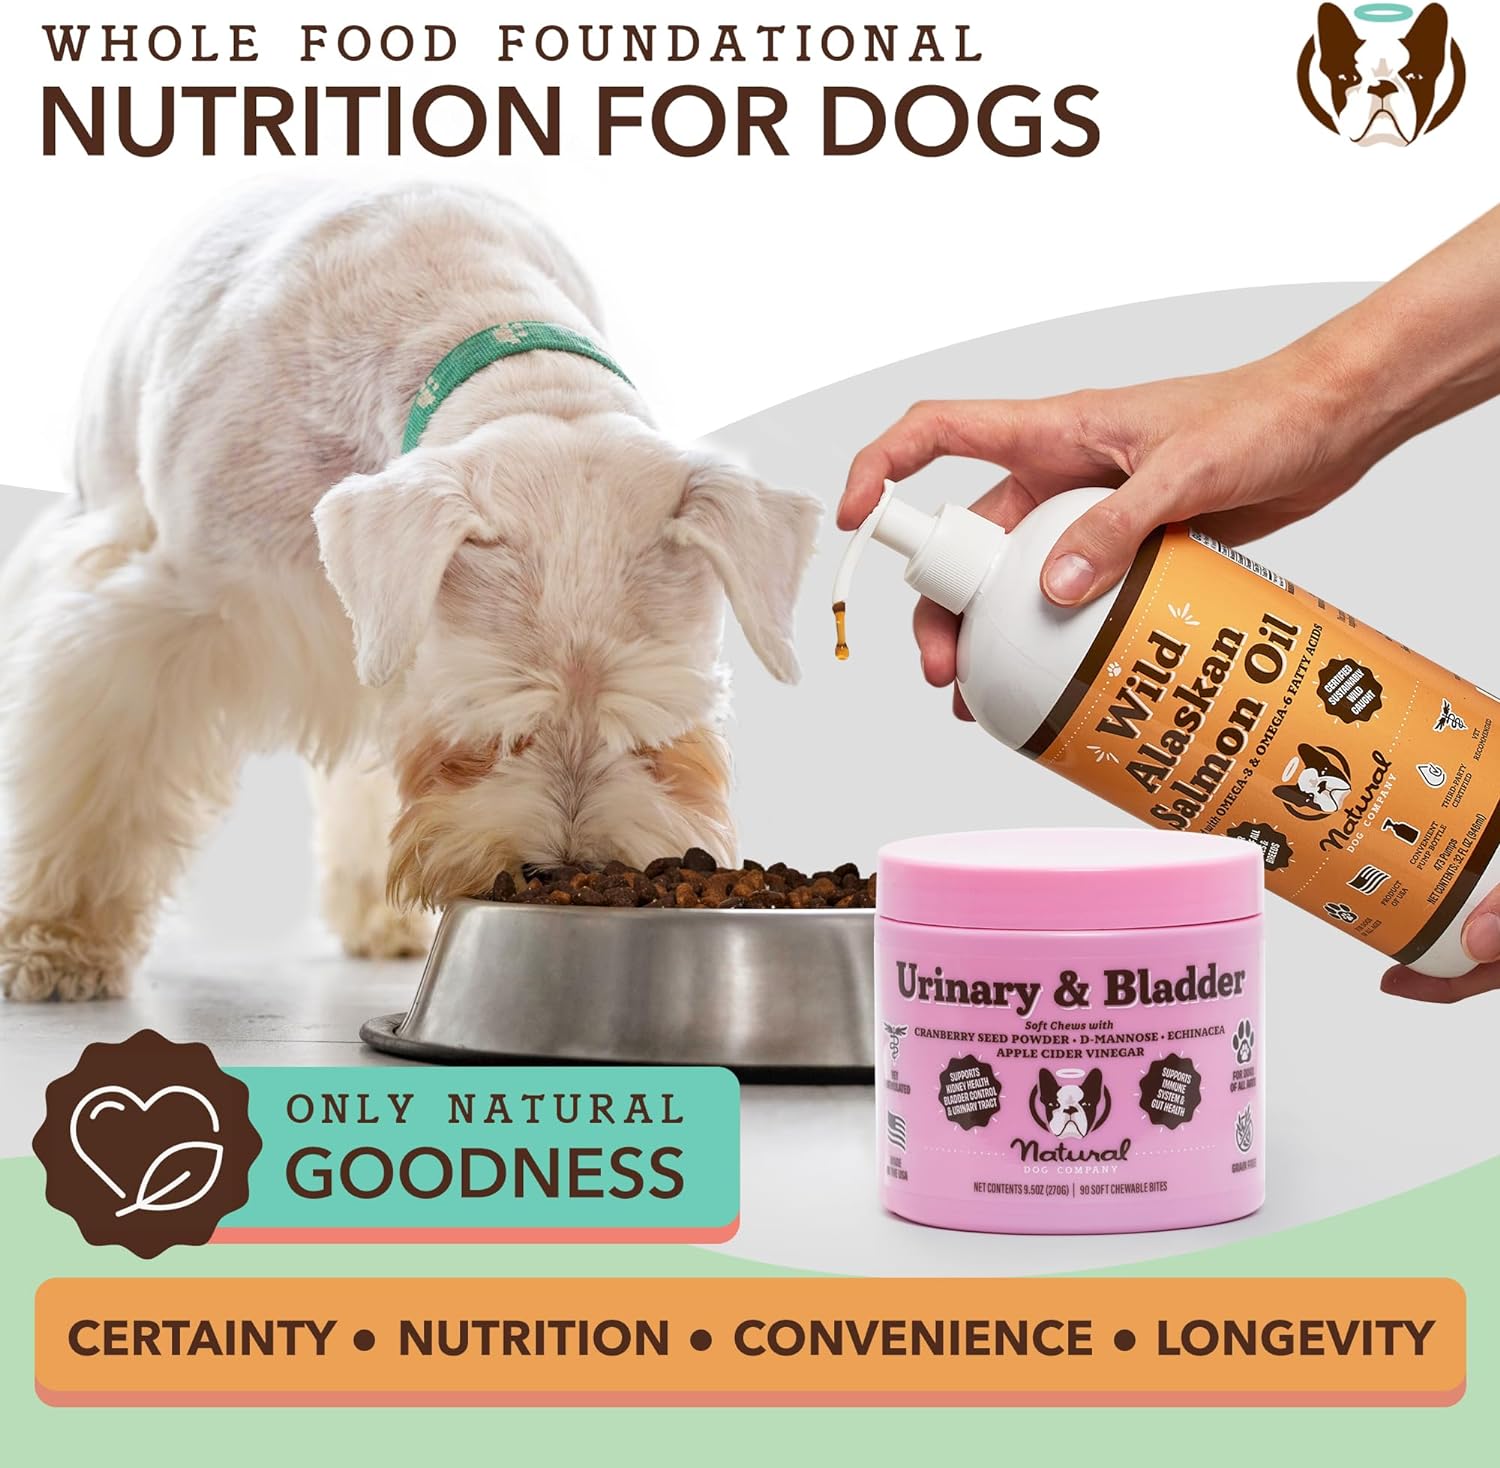 Natural Dog Company Cranberry Supplement for Dogs - Urinary & Bladder Support for Dogs - D-Mannose for Dogs Promotes Bladder Health - Turkey Flavor - Dog UTI Incontinence Supplement - 90 Soft Chews : Pet Supplies